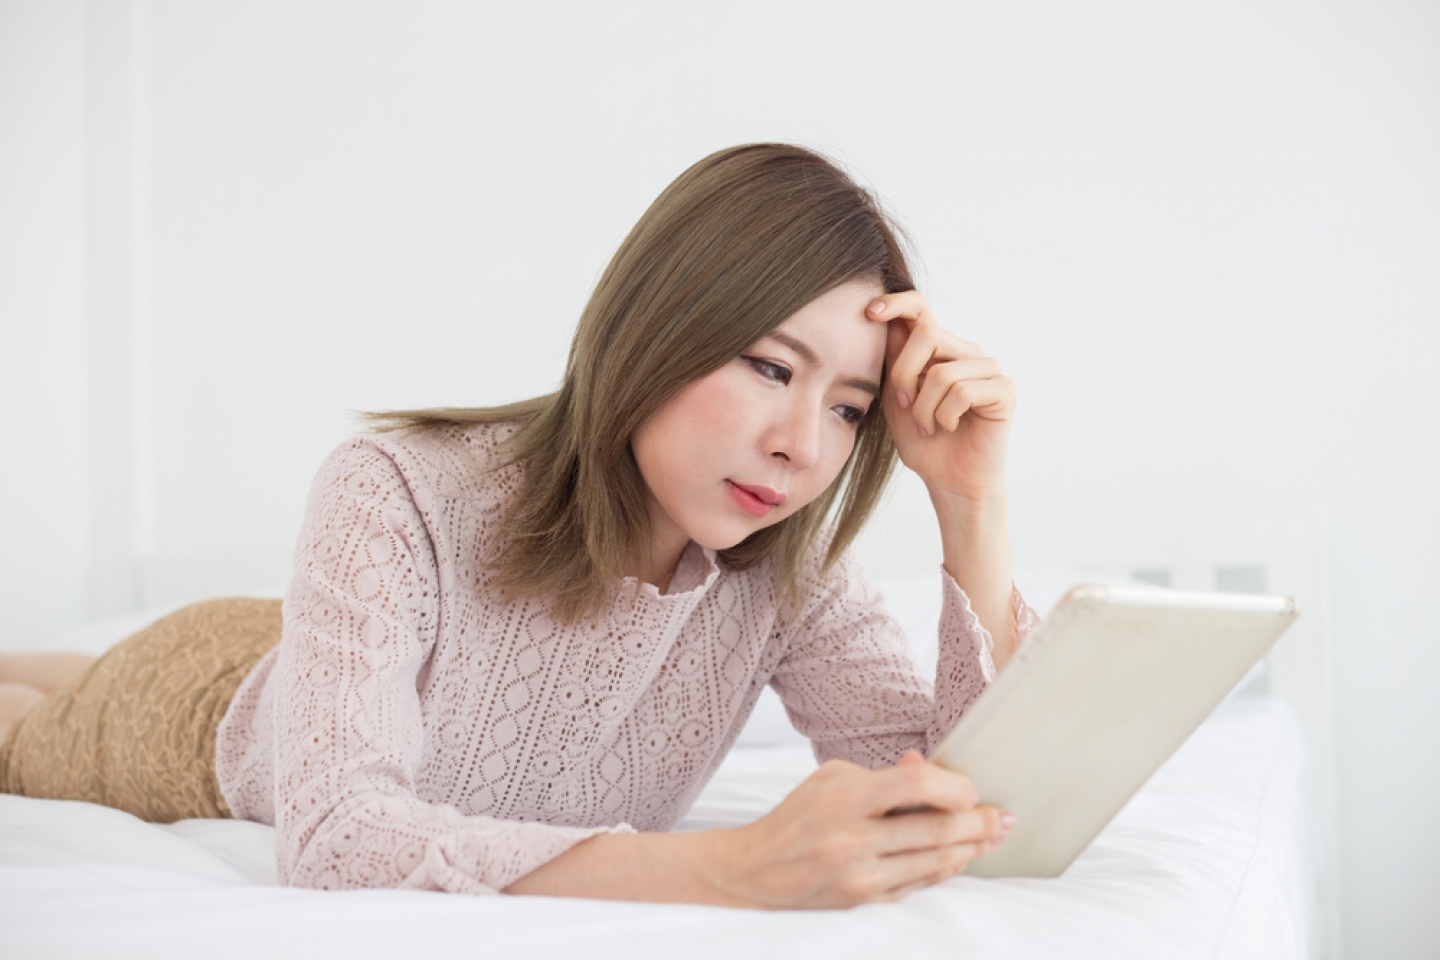 Asian woman looking in tablet on bed